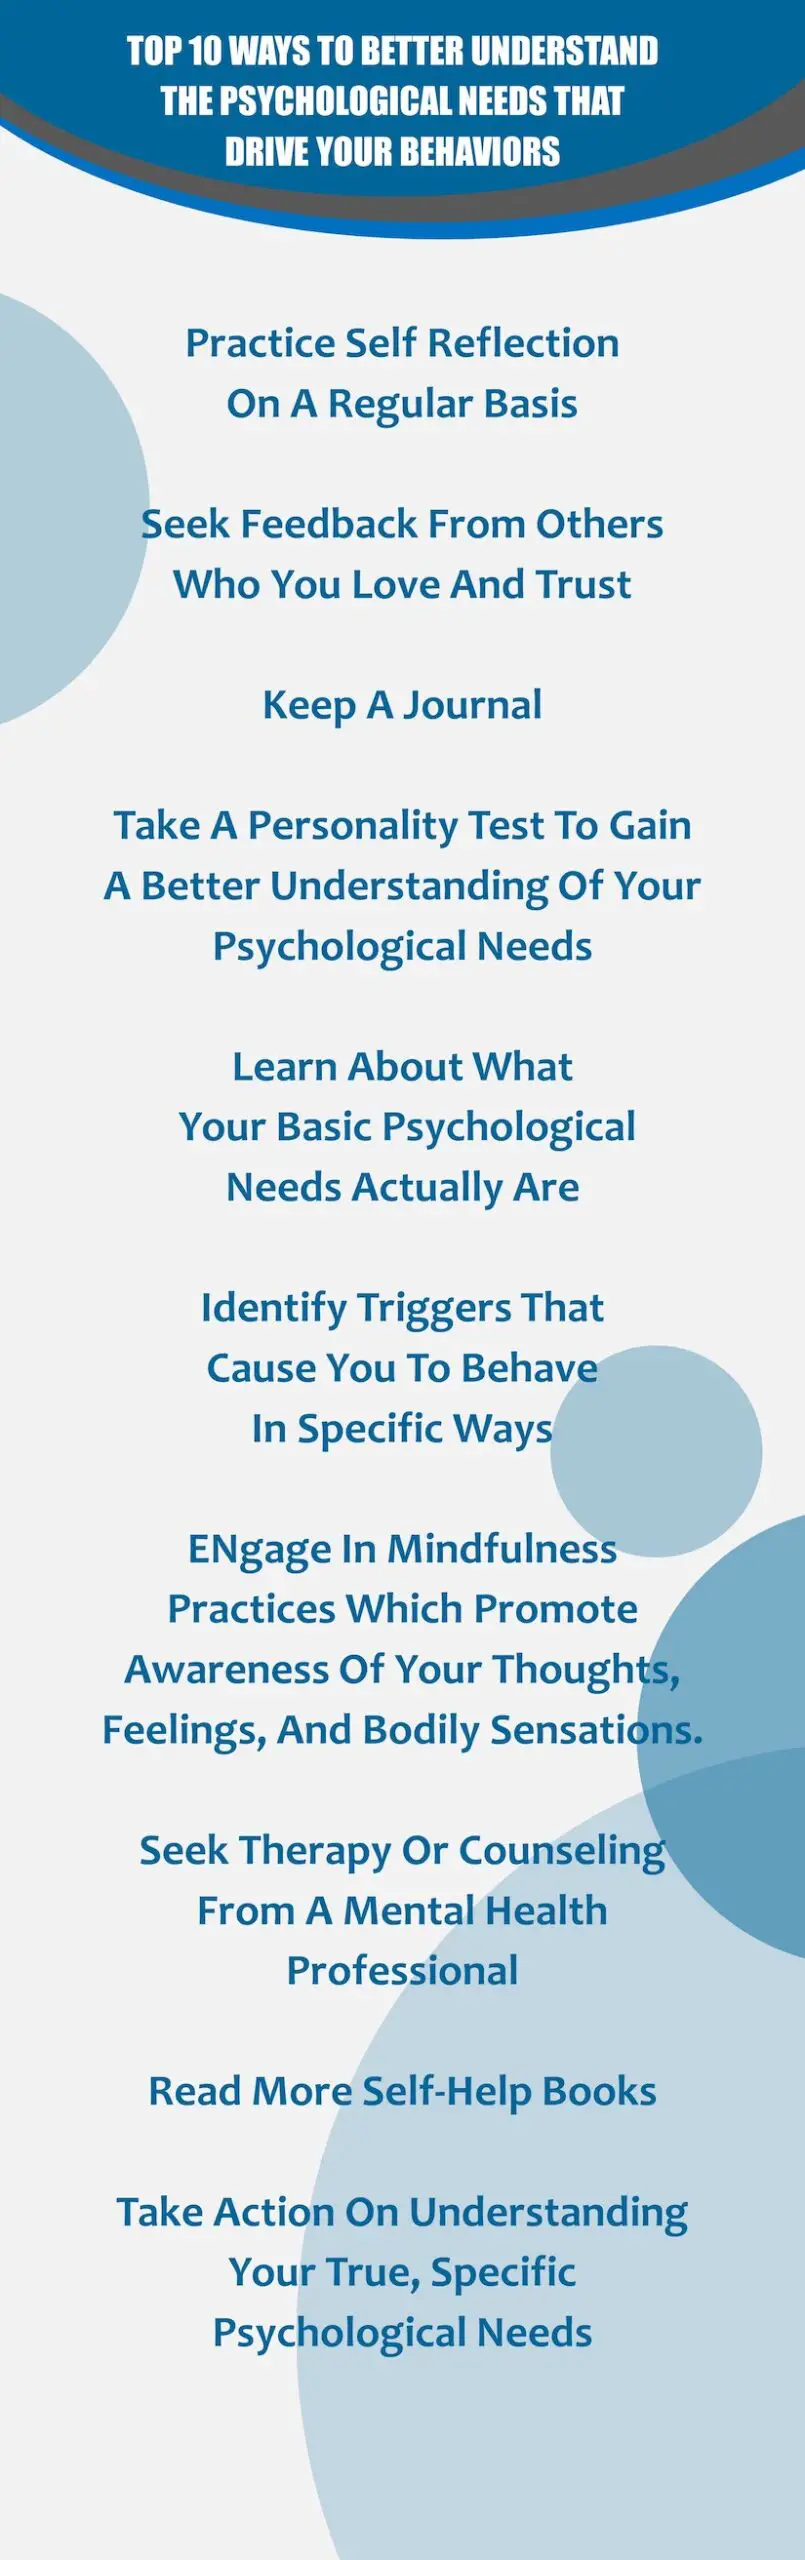 Ways to better understand the psychological needs that drive your behaviors.